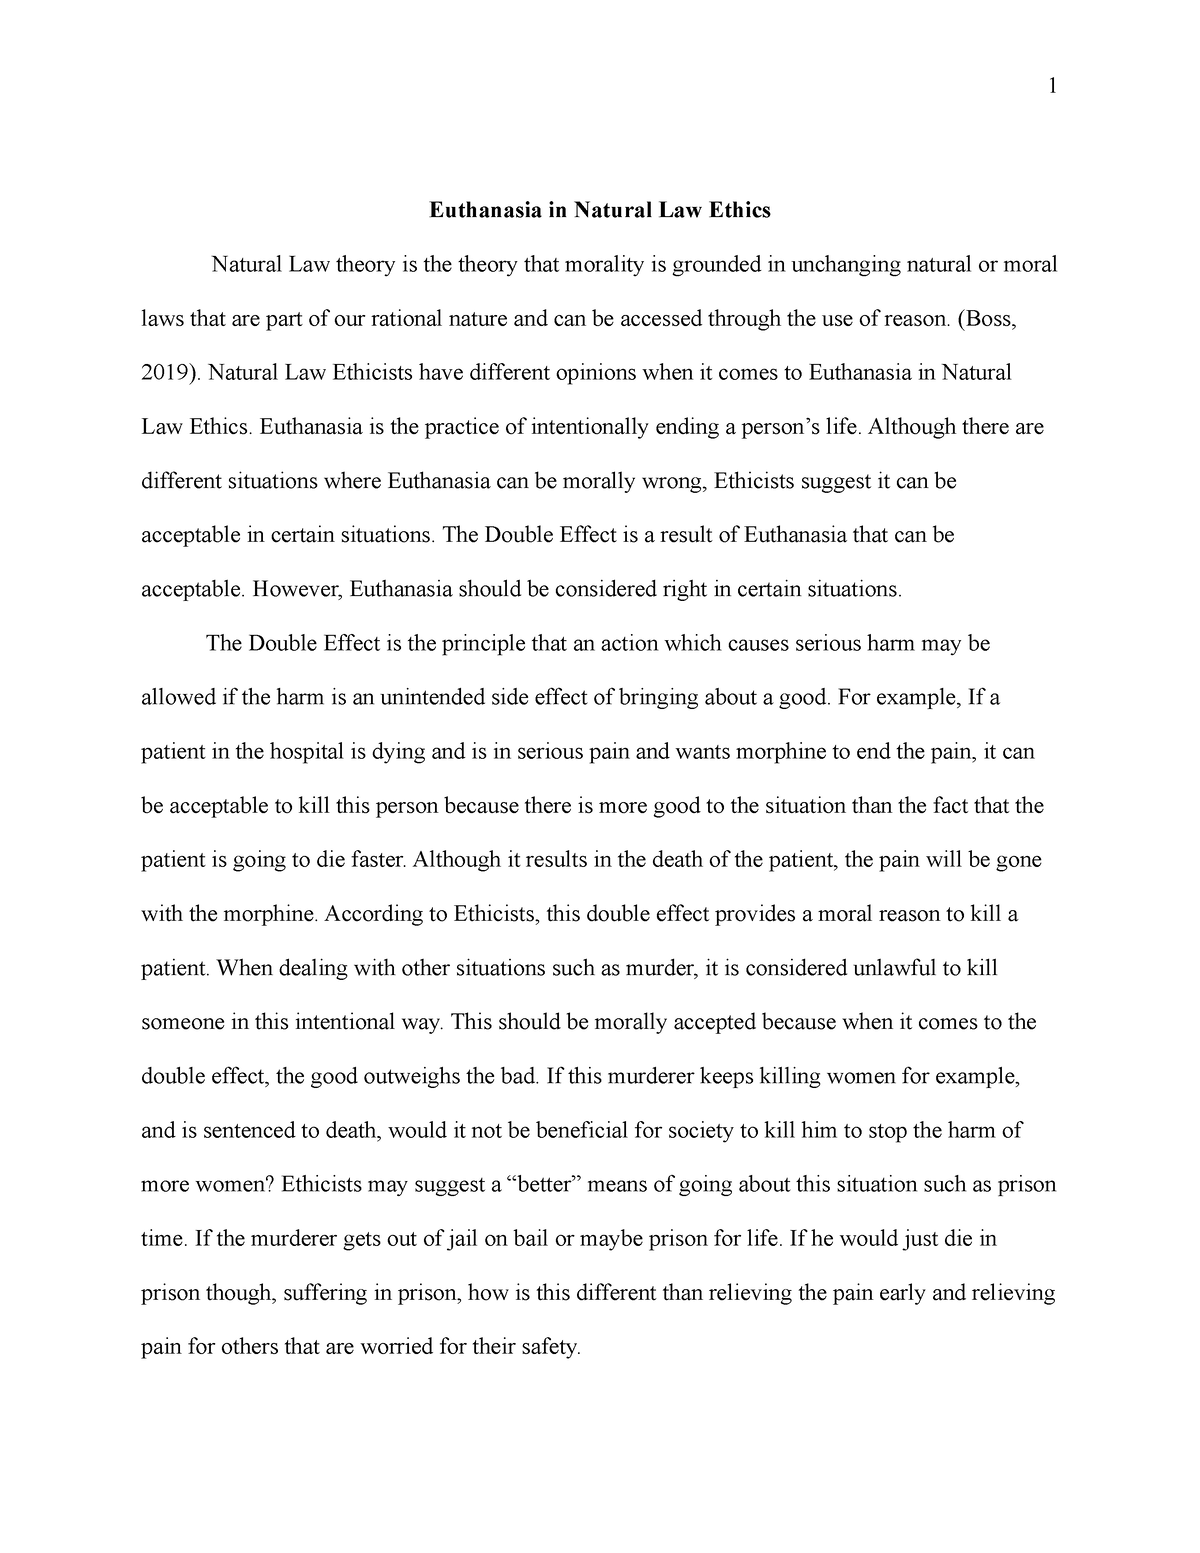 what is natural law ethics essay